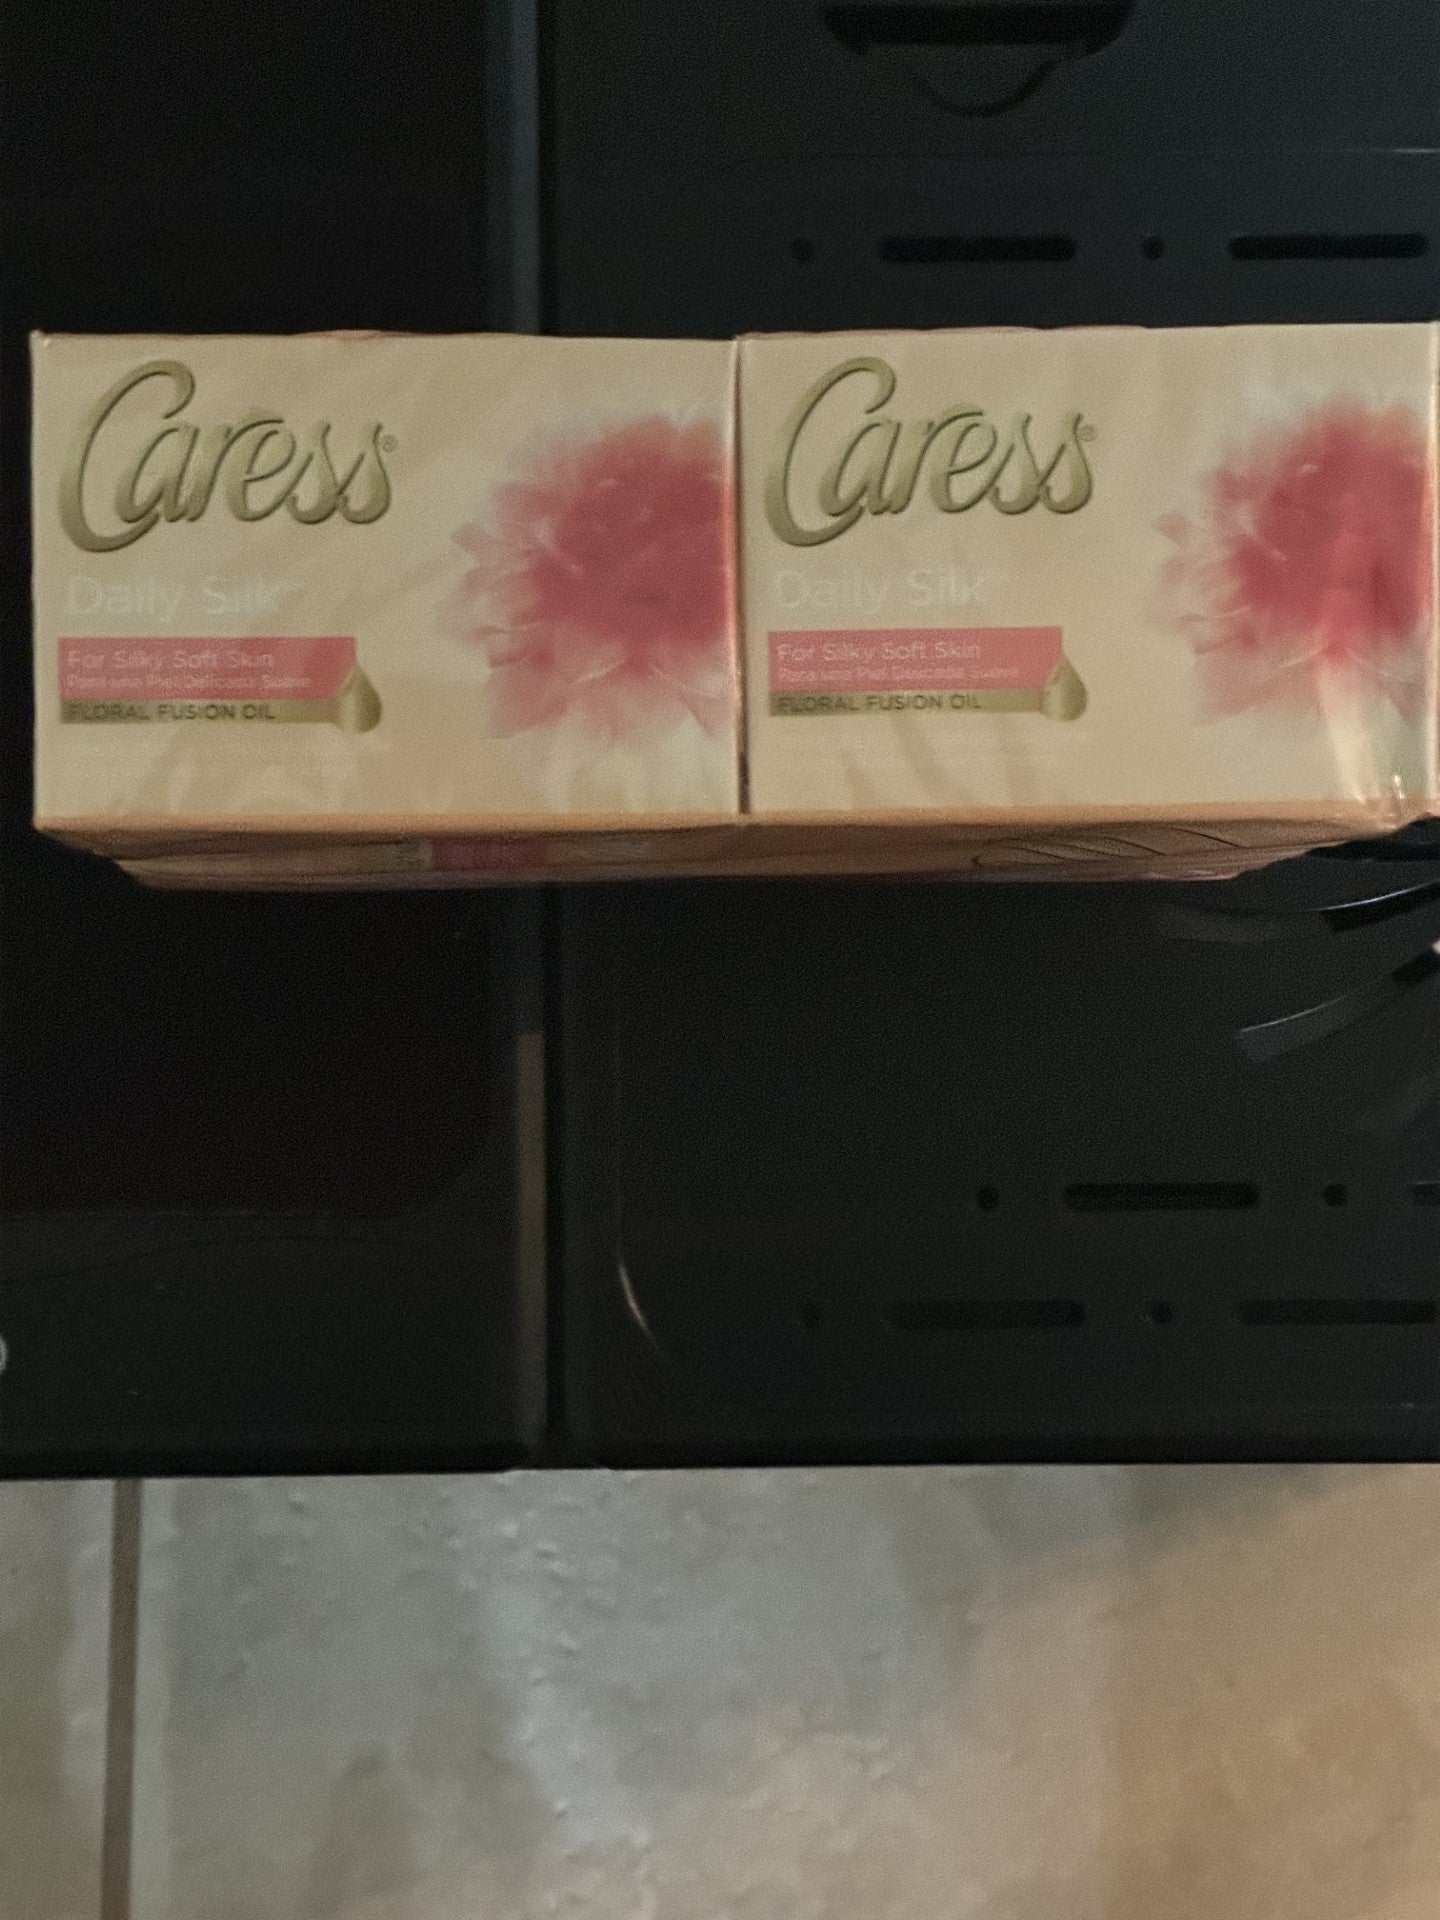 Caress White Peach and Orange Blossom Scent Body Bar Soap 10 Pack